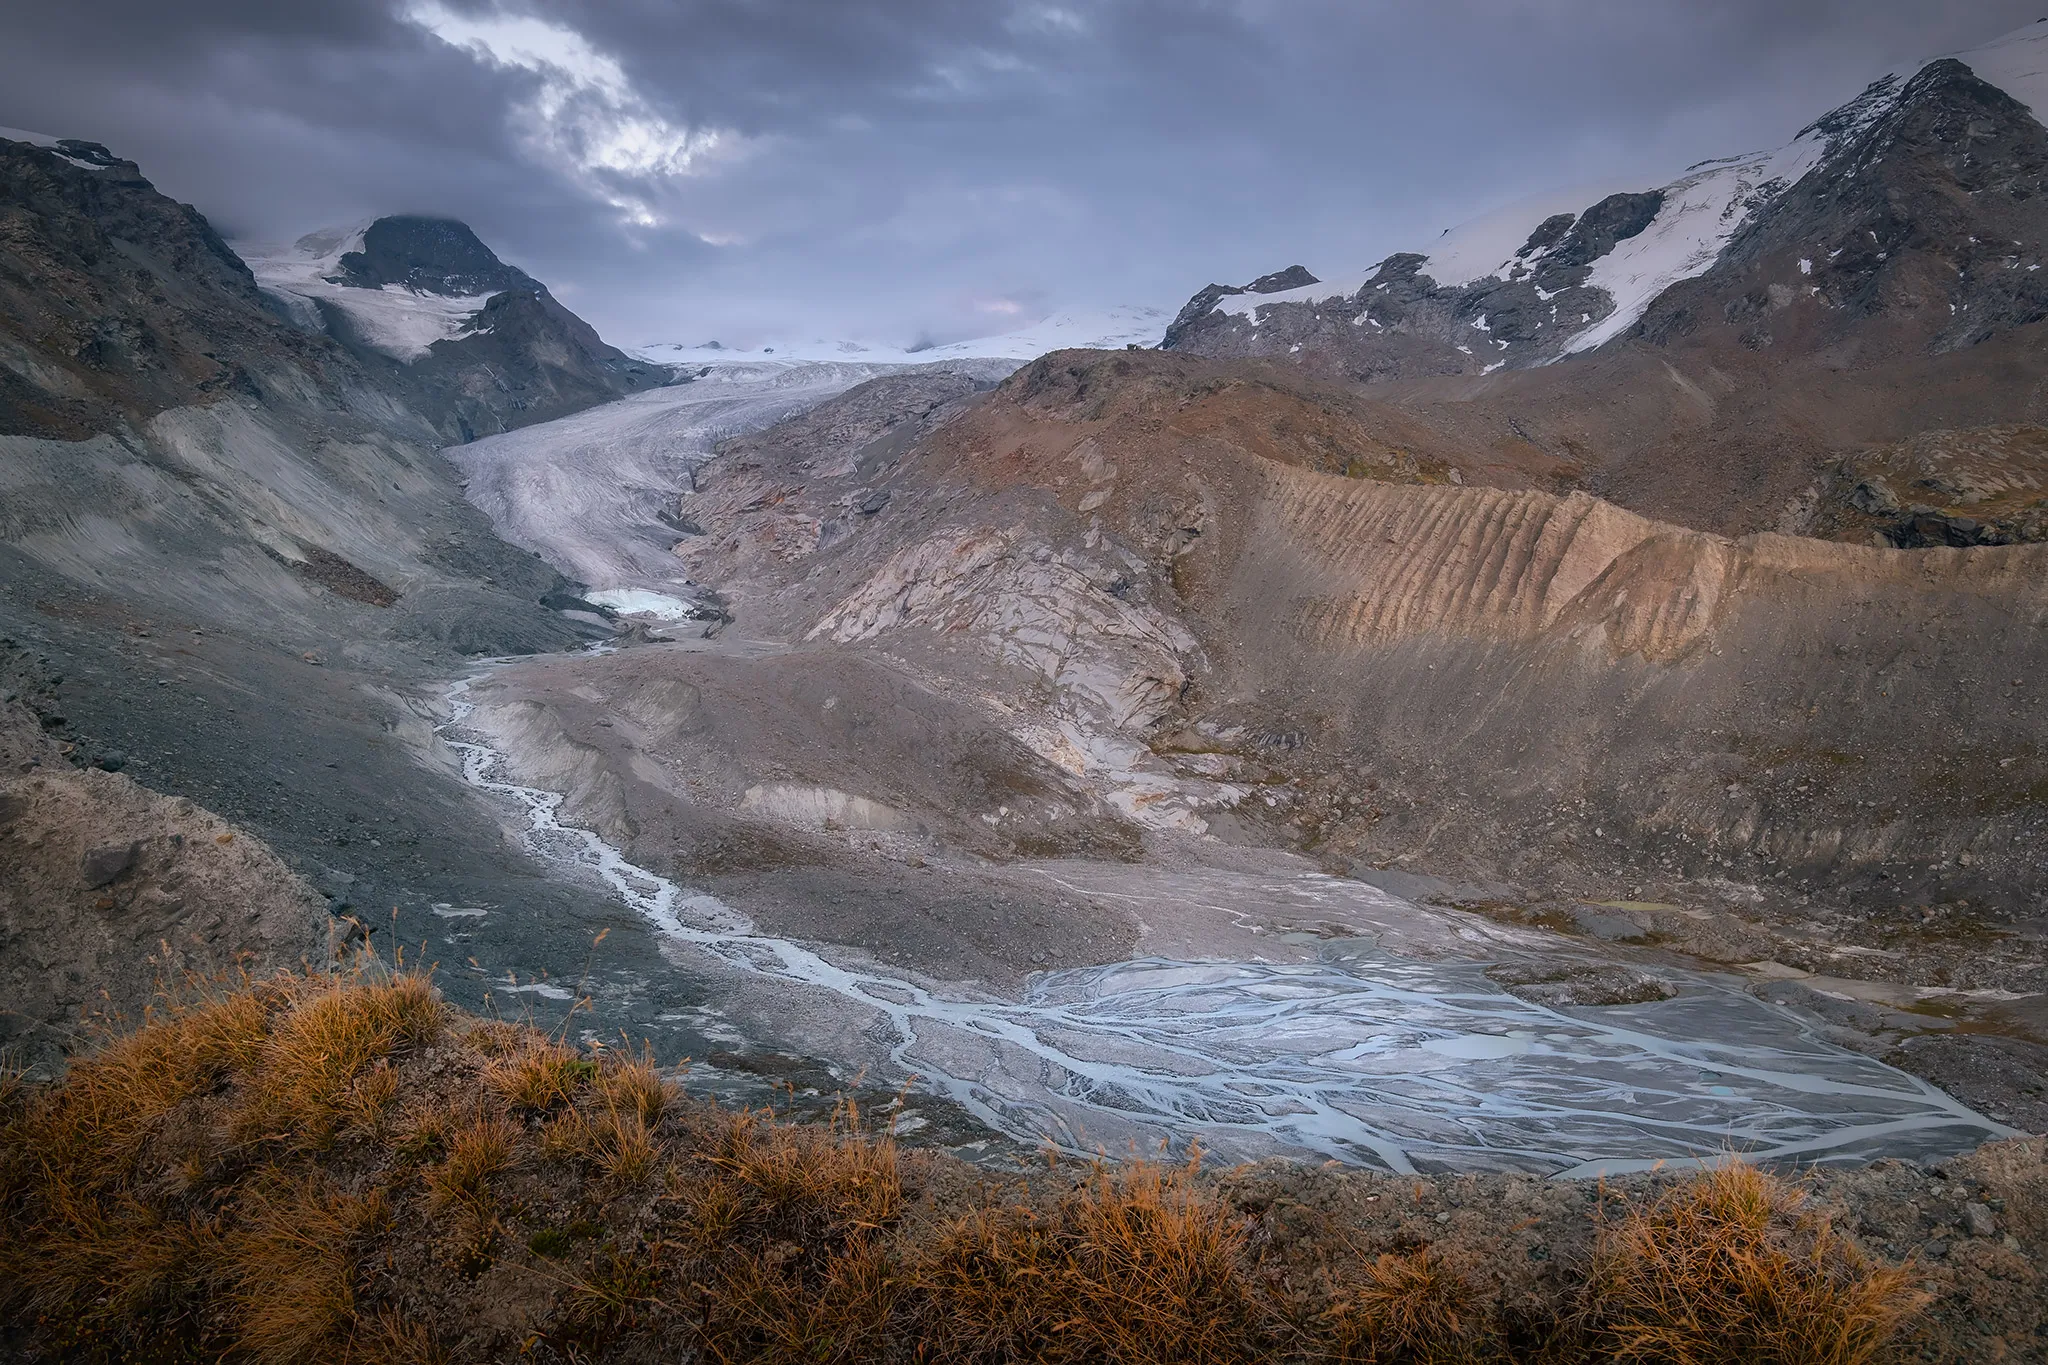 One of the many glaciers in Swtizerland.